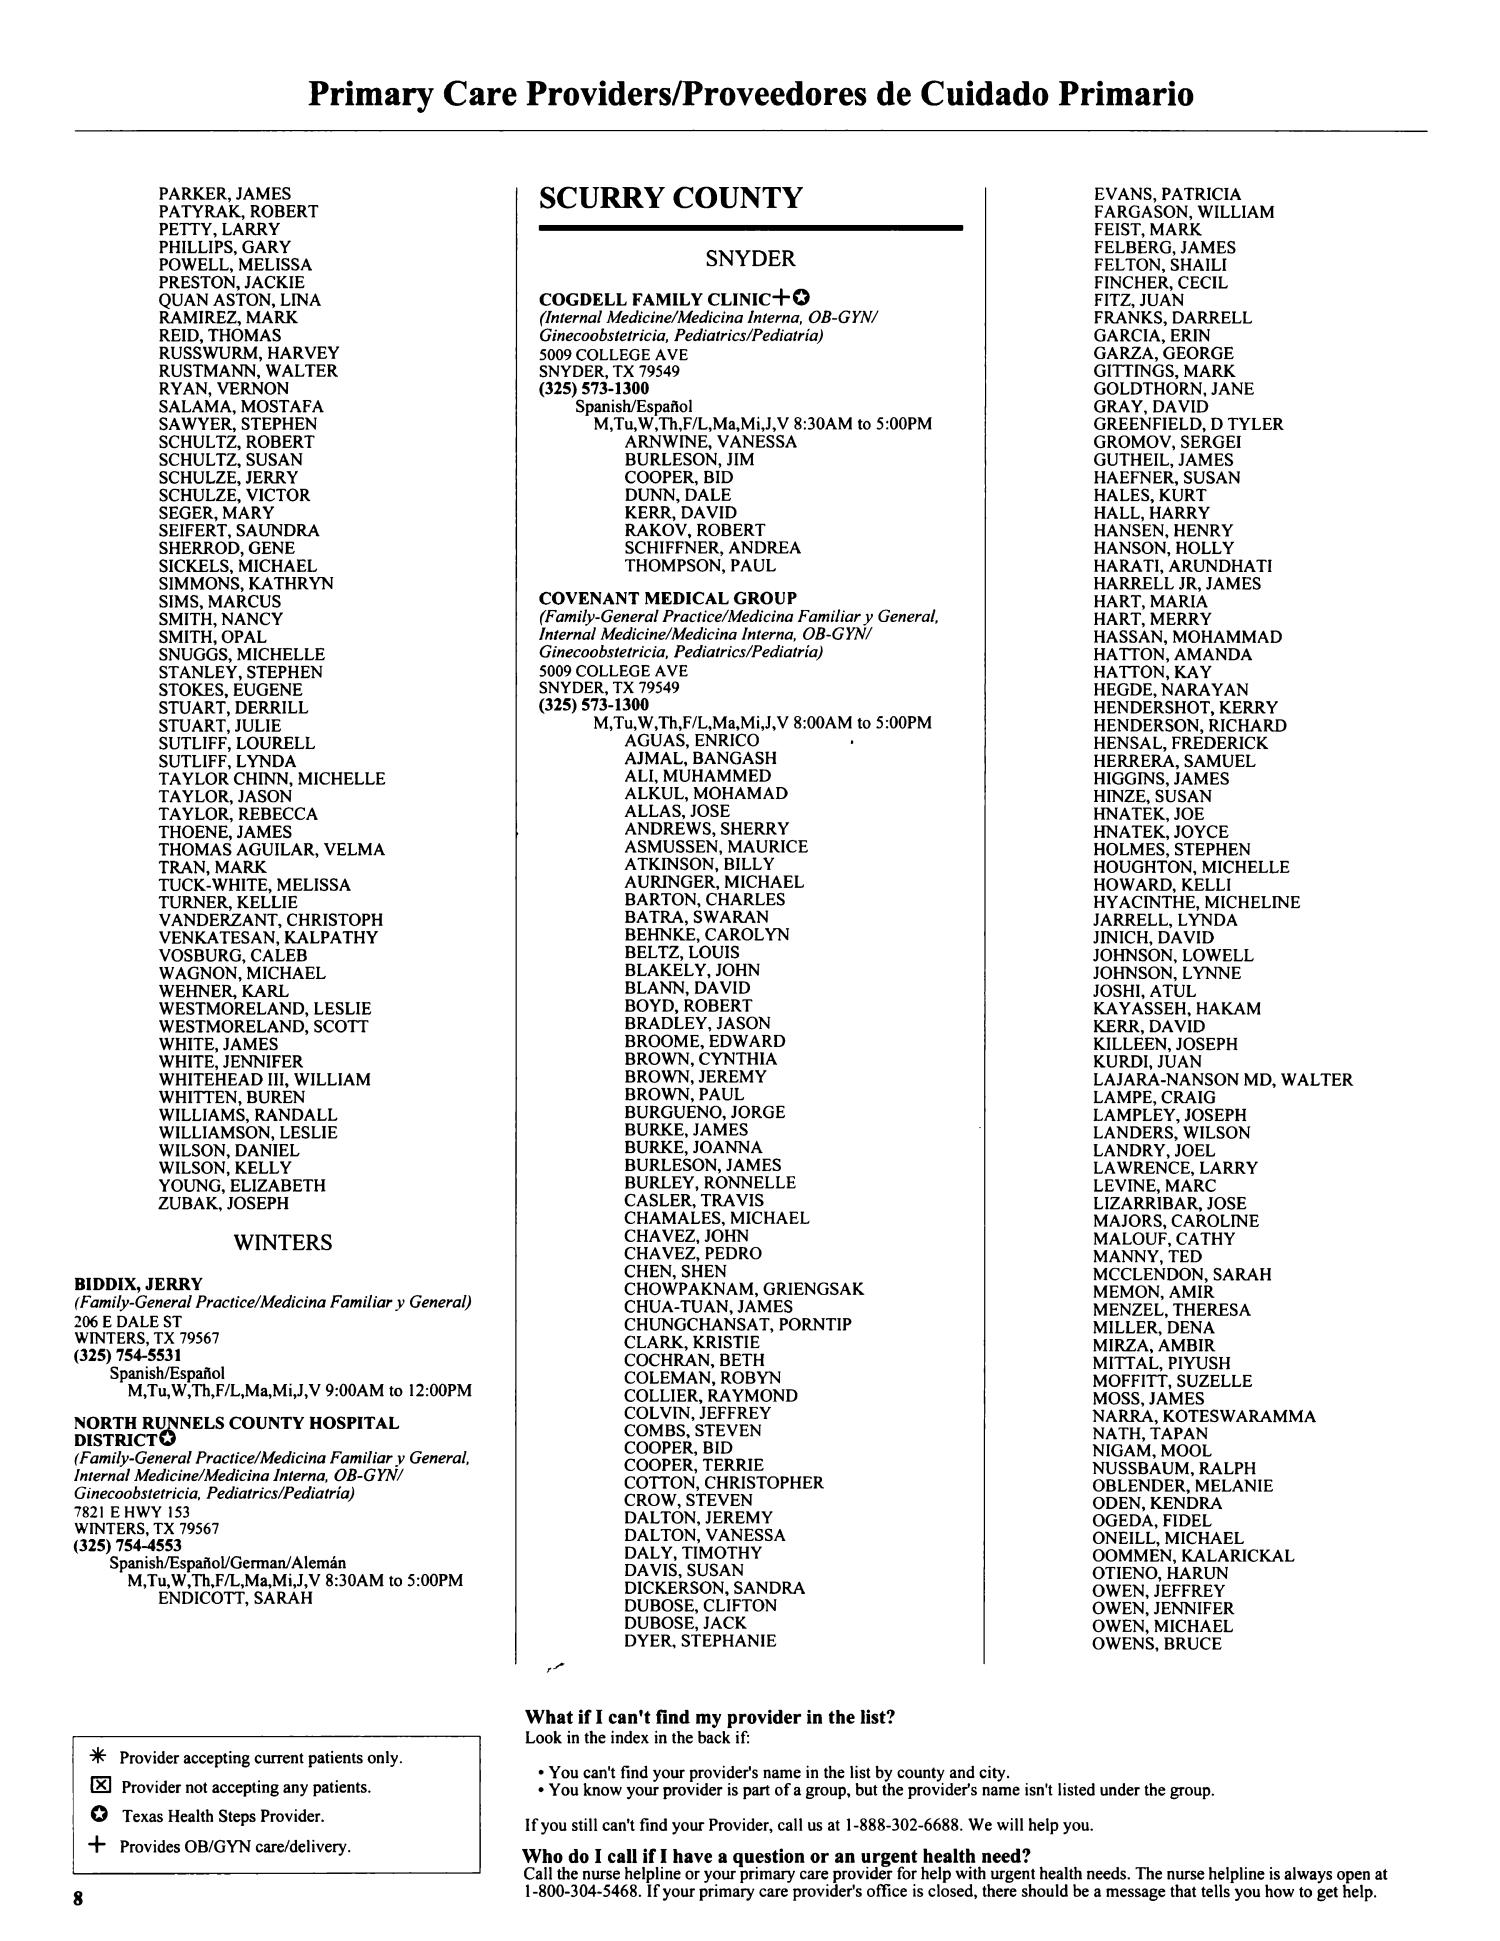 Primary Care Case Management Primary Care Provider and Hospital List: Northwest Texas, June 2011
                                                
                                                    8
                                                